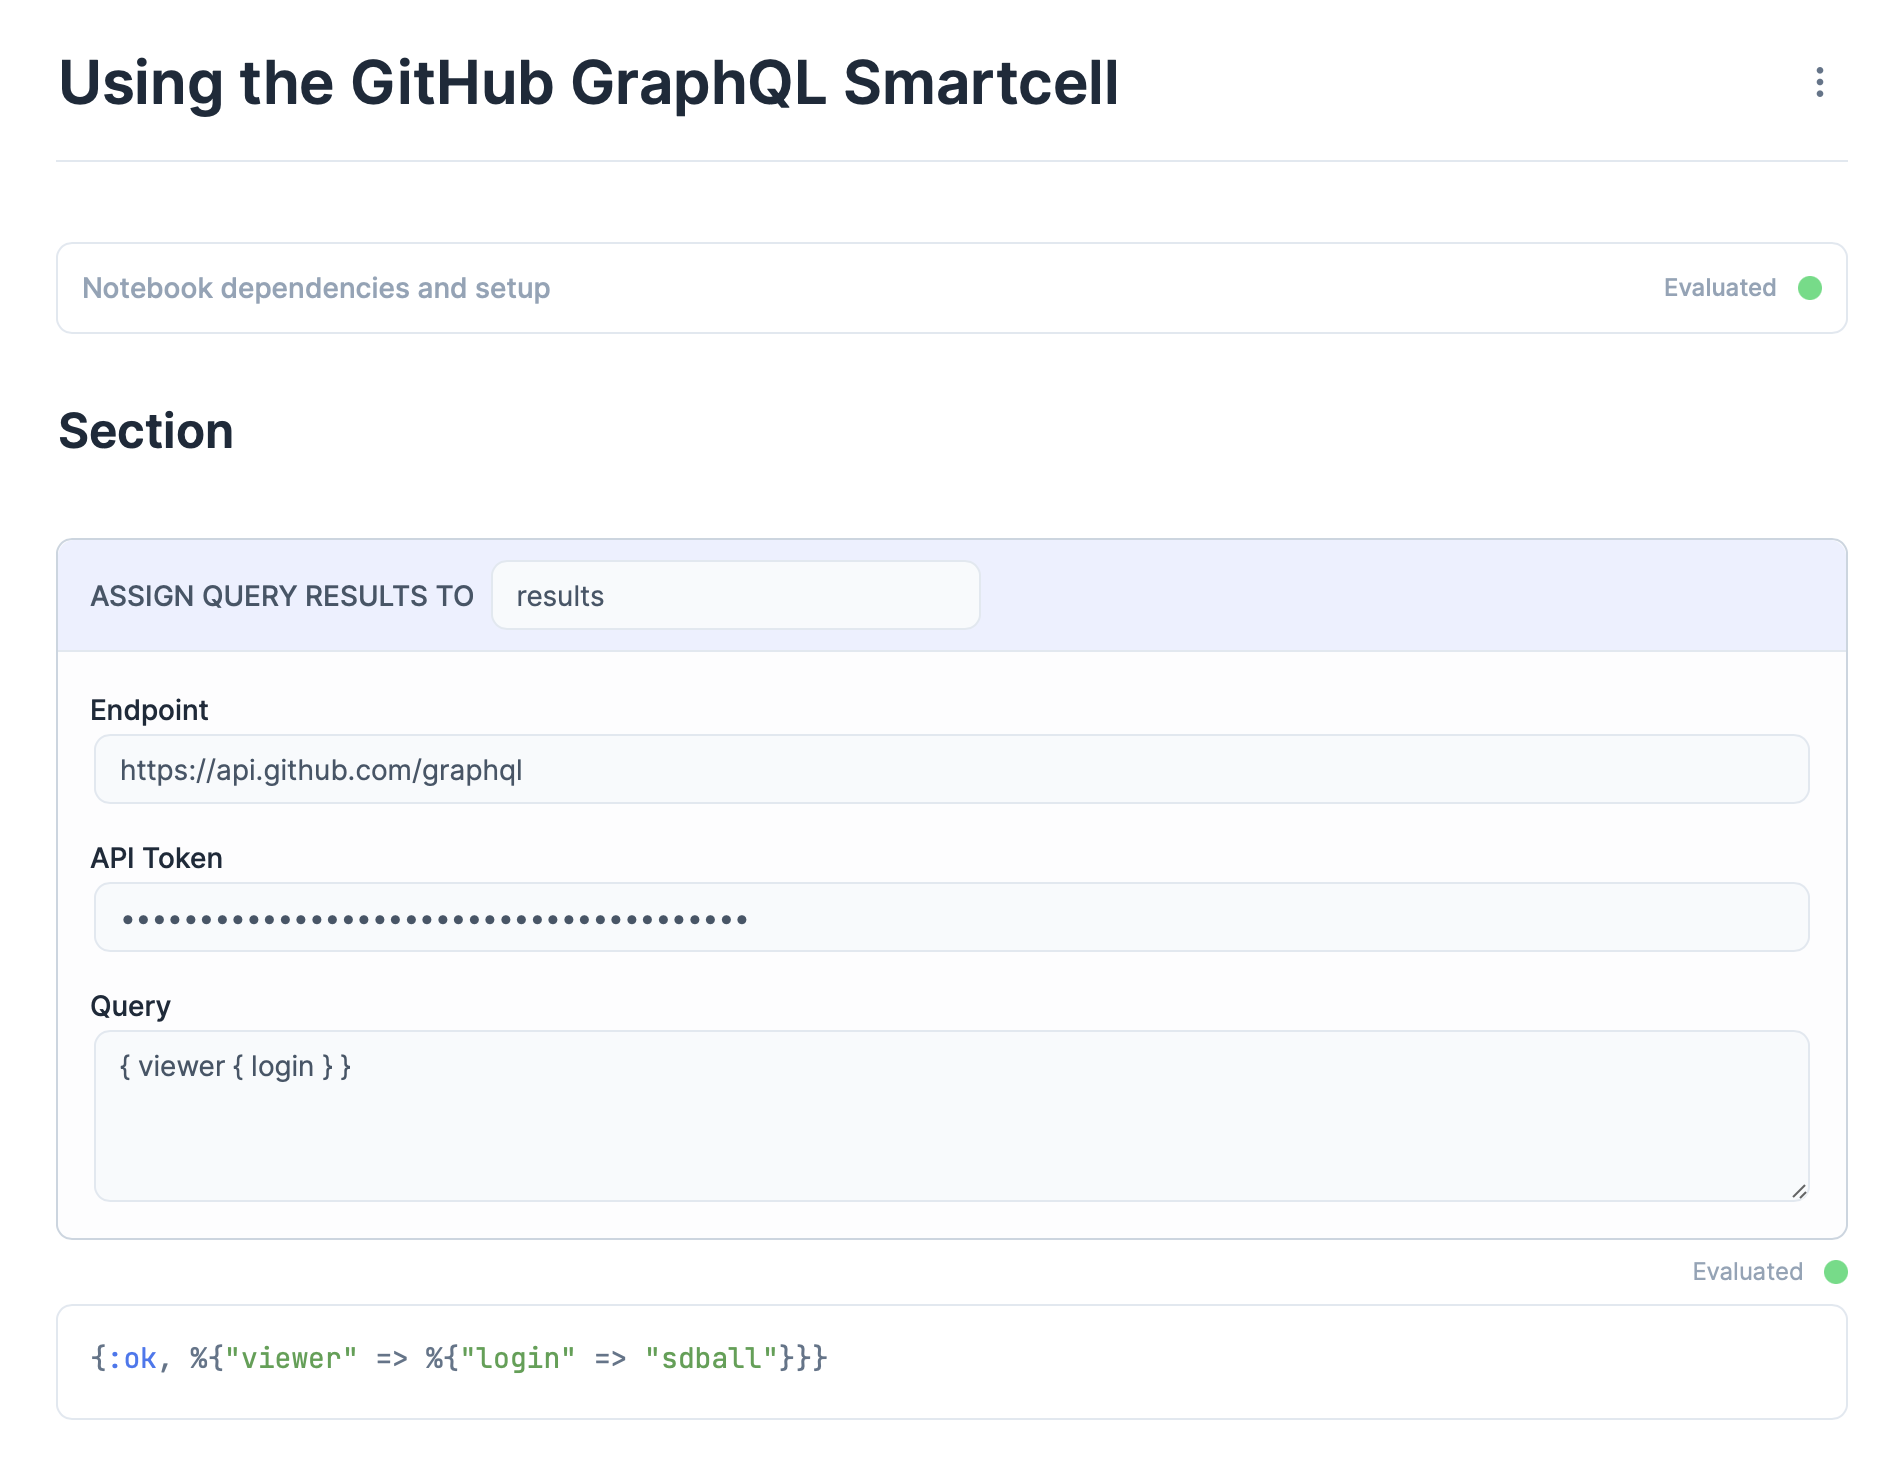 Working query results from the GitHub GraphQL Query smartcell